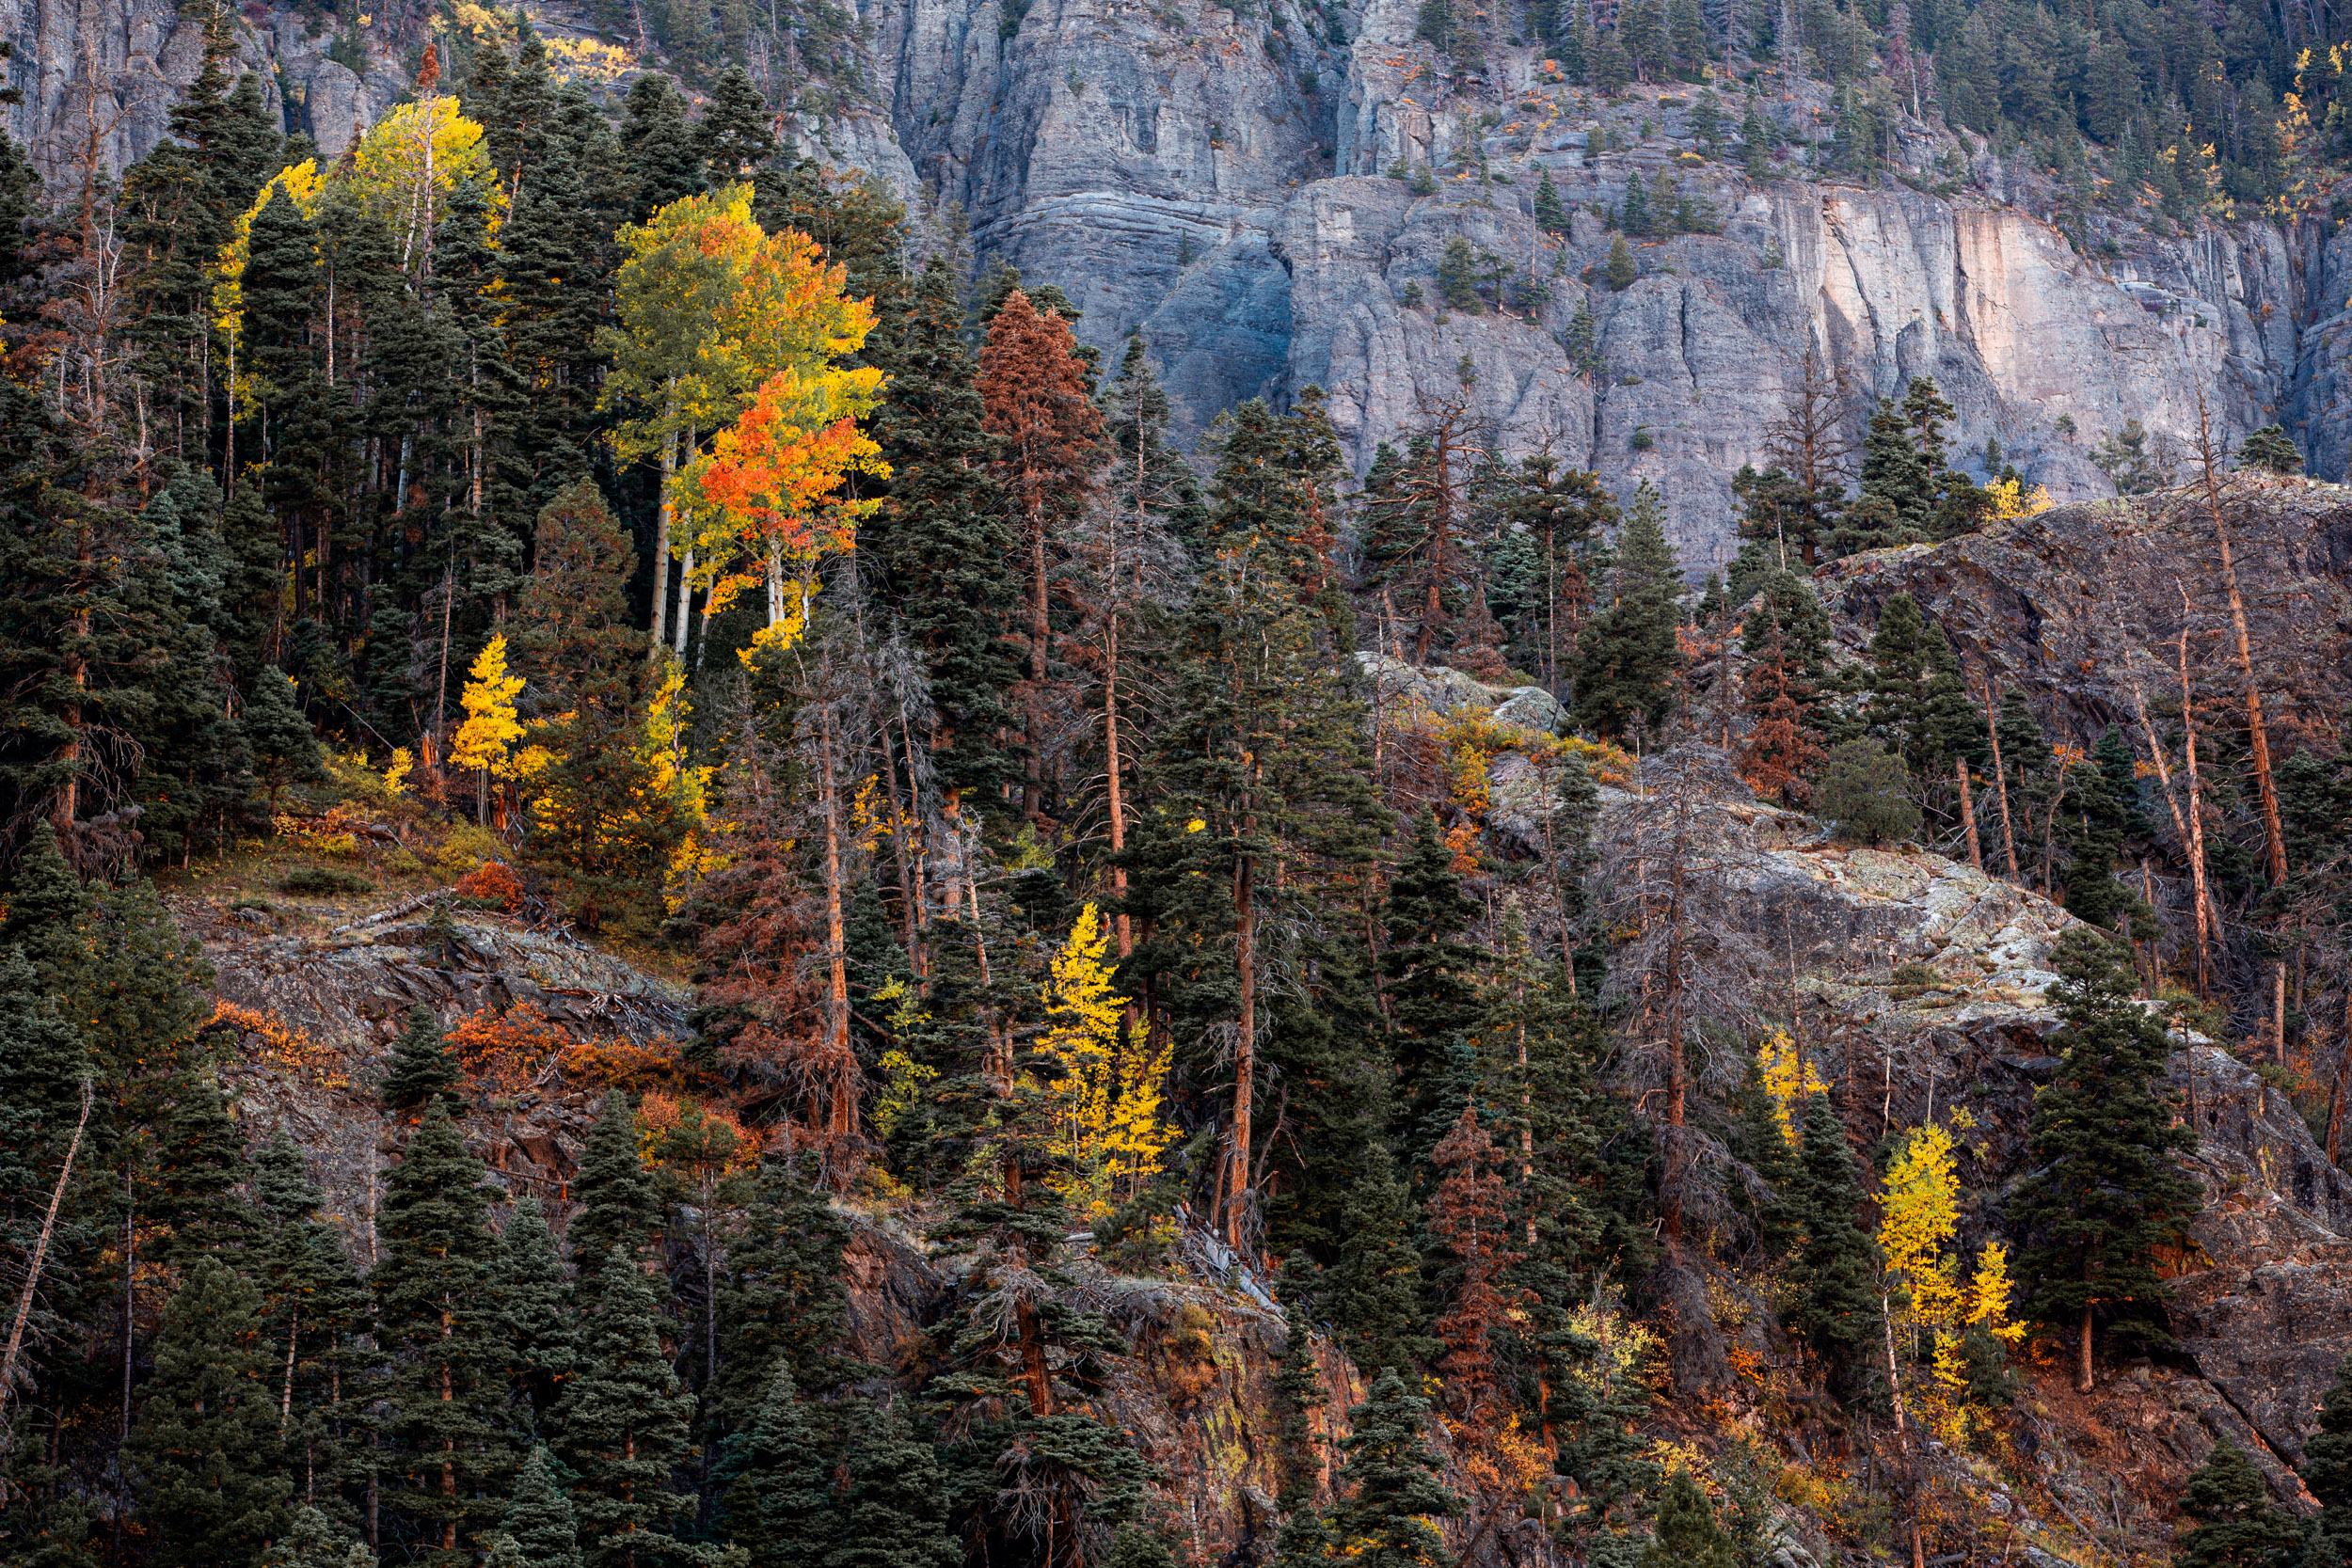 The rocky landscape is punctuated by the brilliant reds, oranges, and yellows in the San Juan mountains